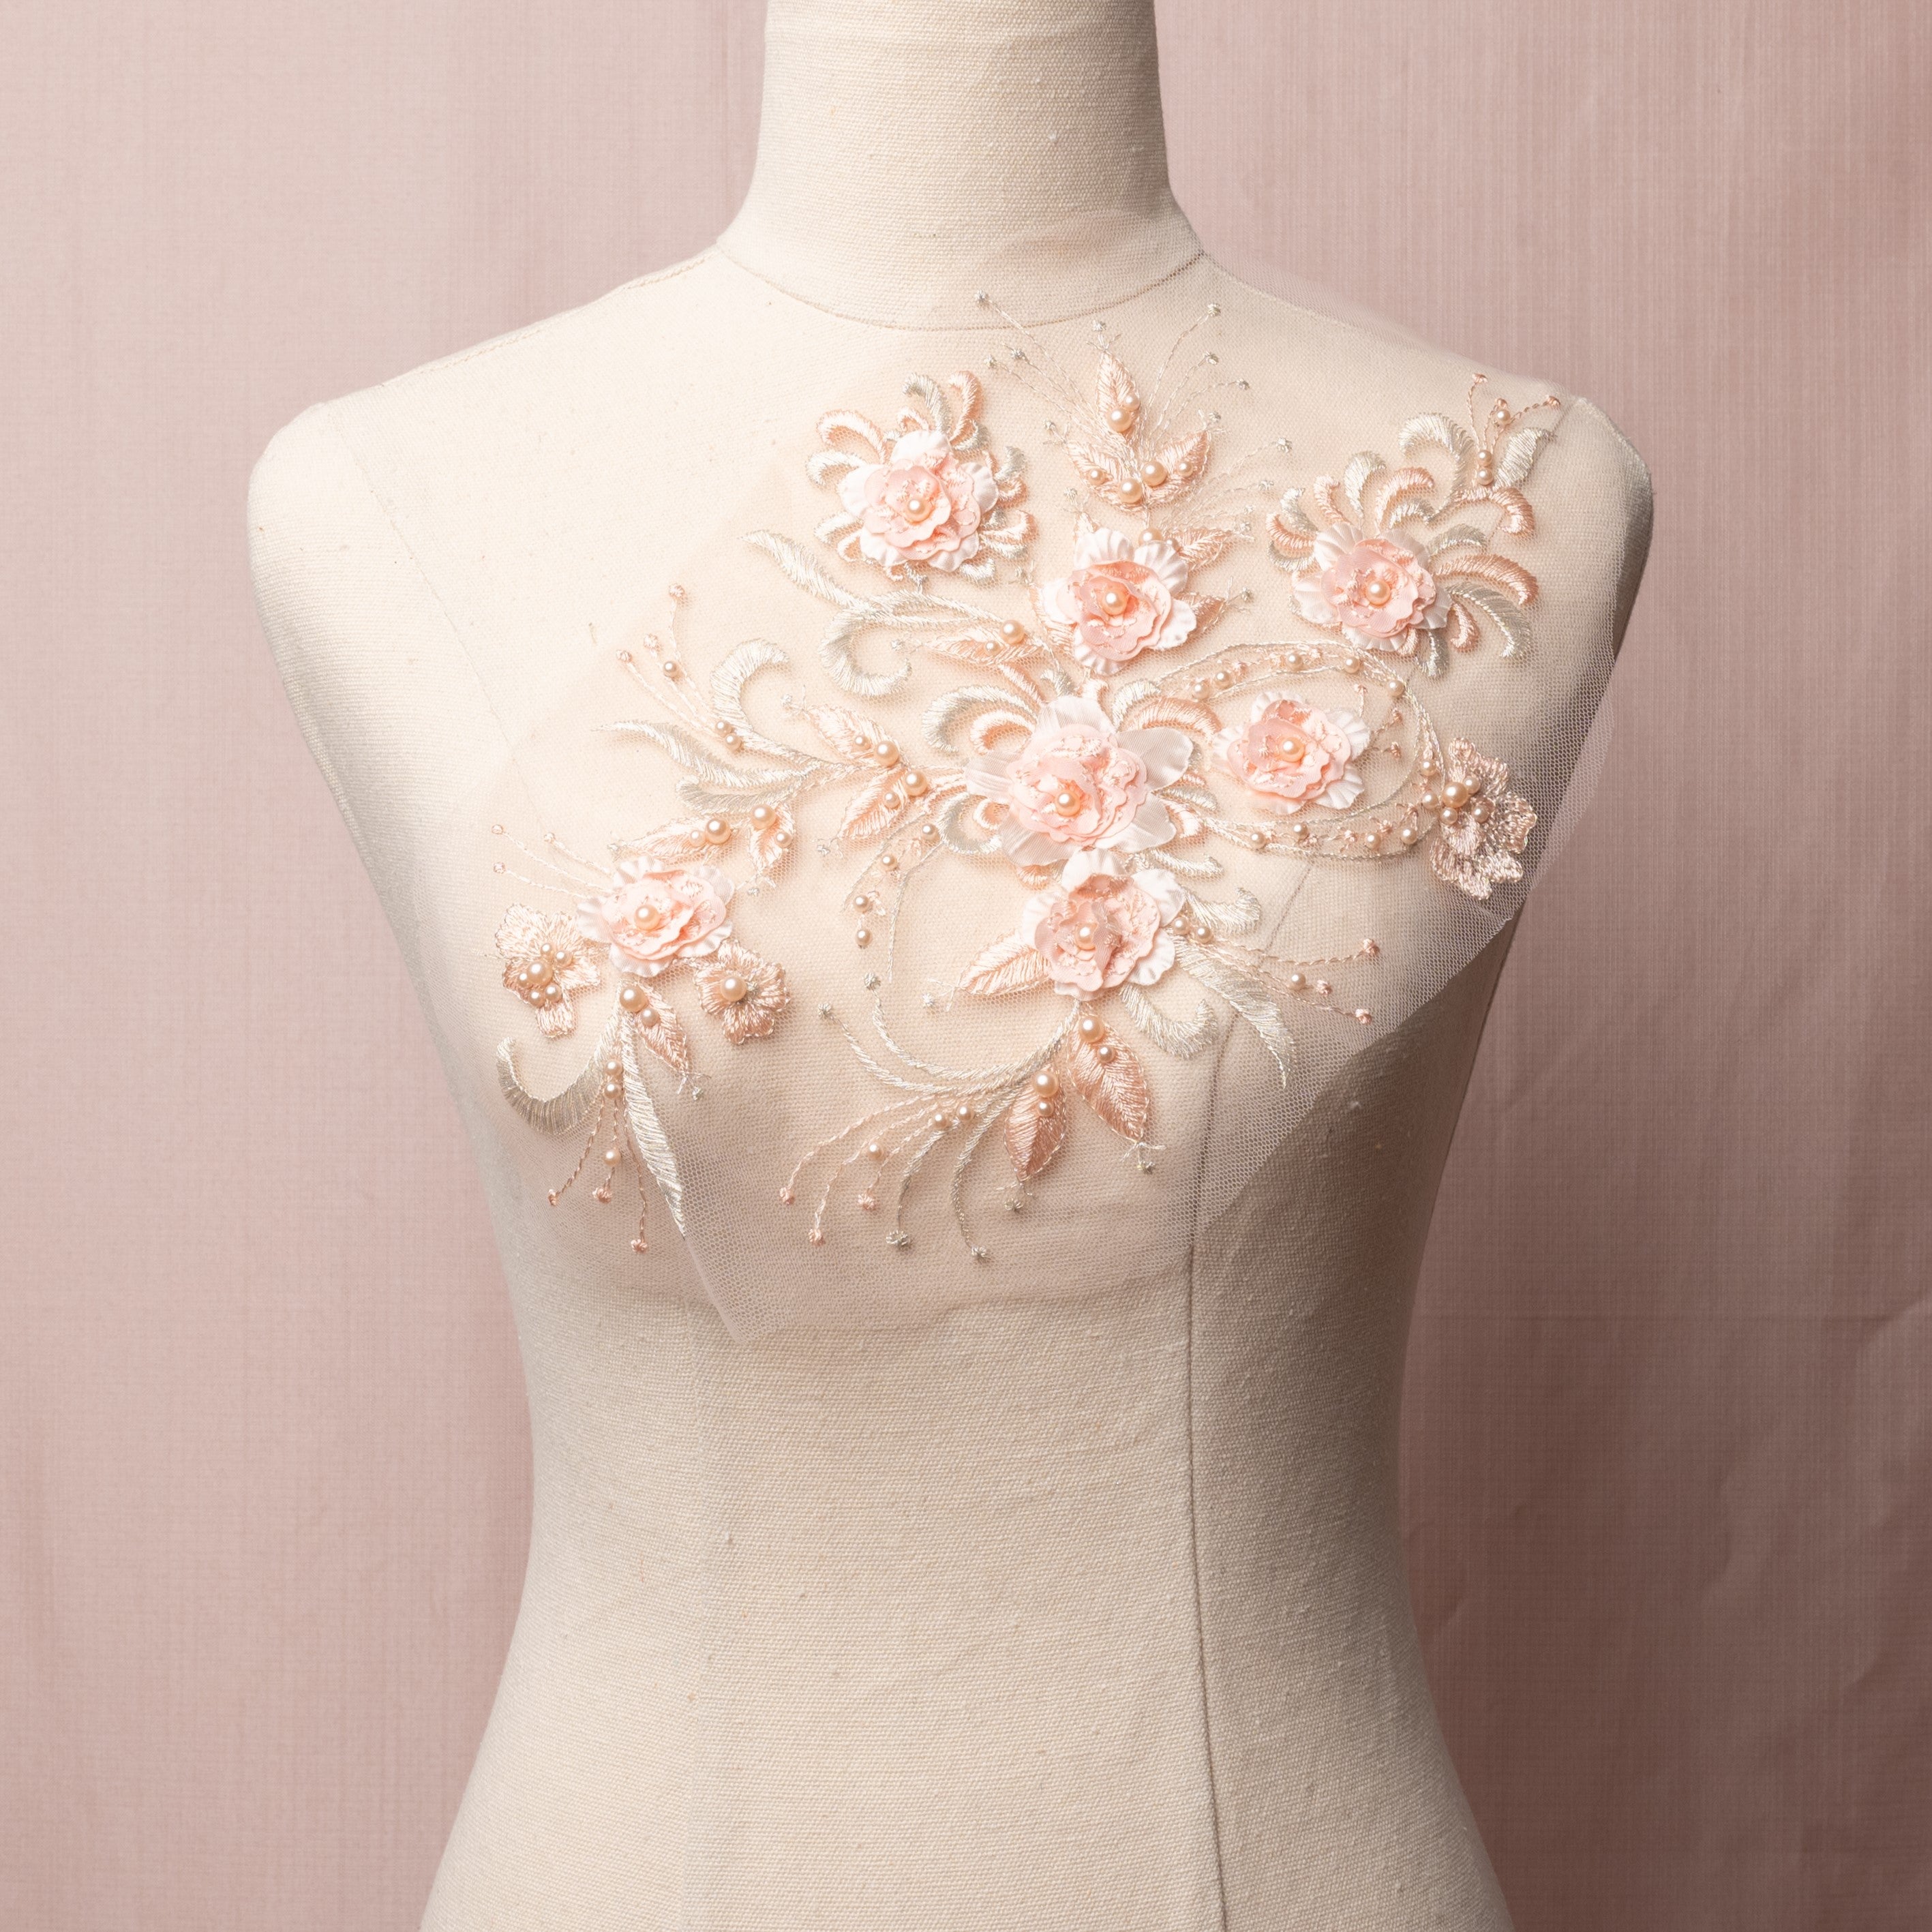 Apricot 3D floral applique embroidered onto a net backing.  The flower centres and leaves are embellished with pale apricot pearls.  The applique is displayed on a mannequin.